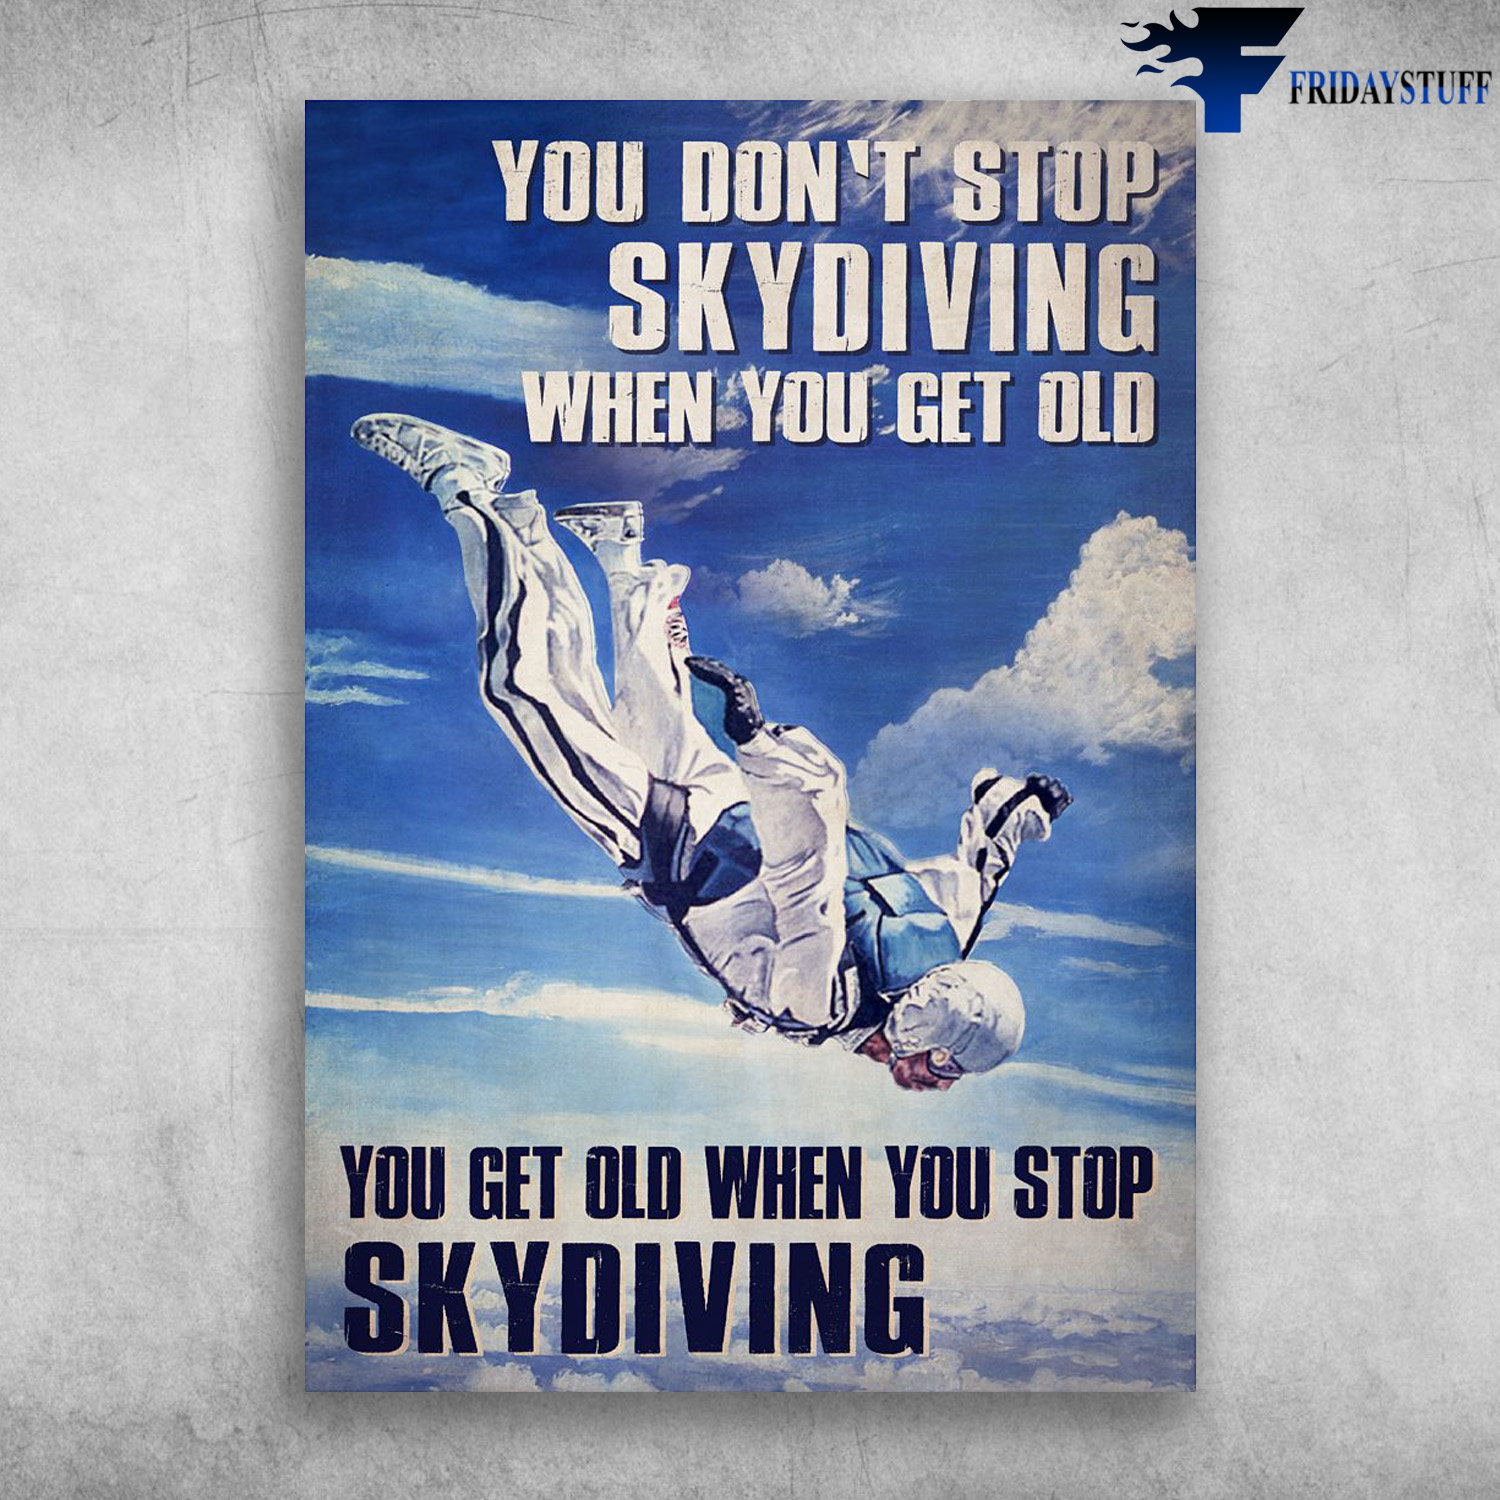 Skydiving Man - You Don't Stop Skydiving, When You Get Old, You Get Old When You Stop Skydiving